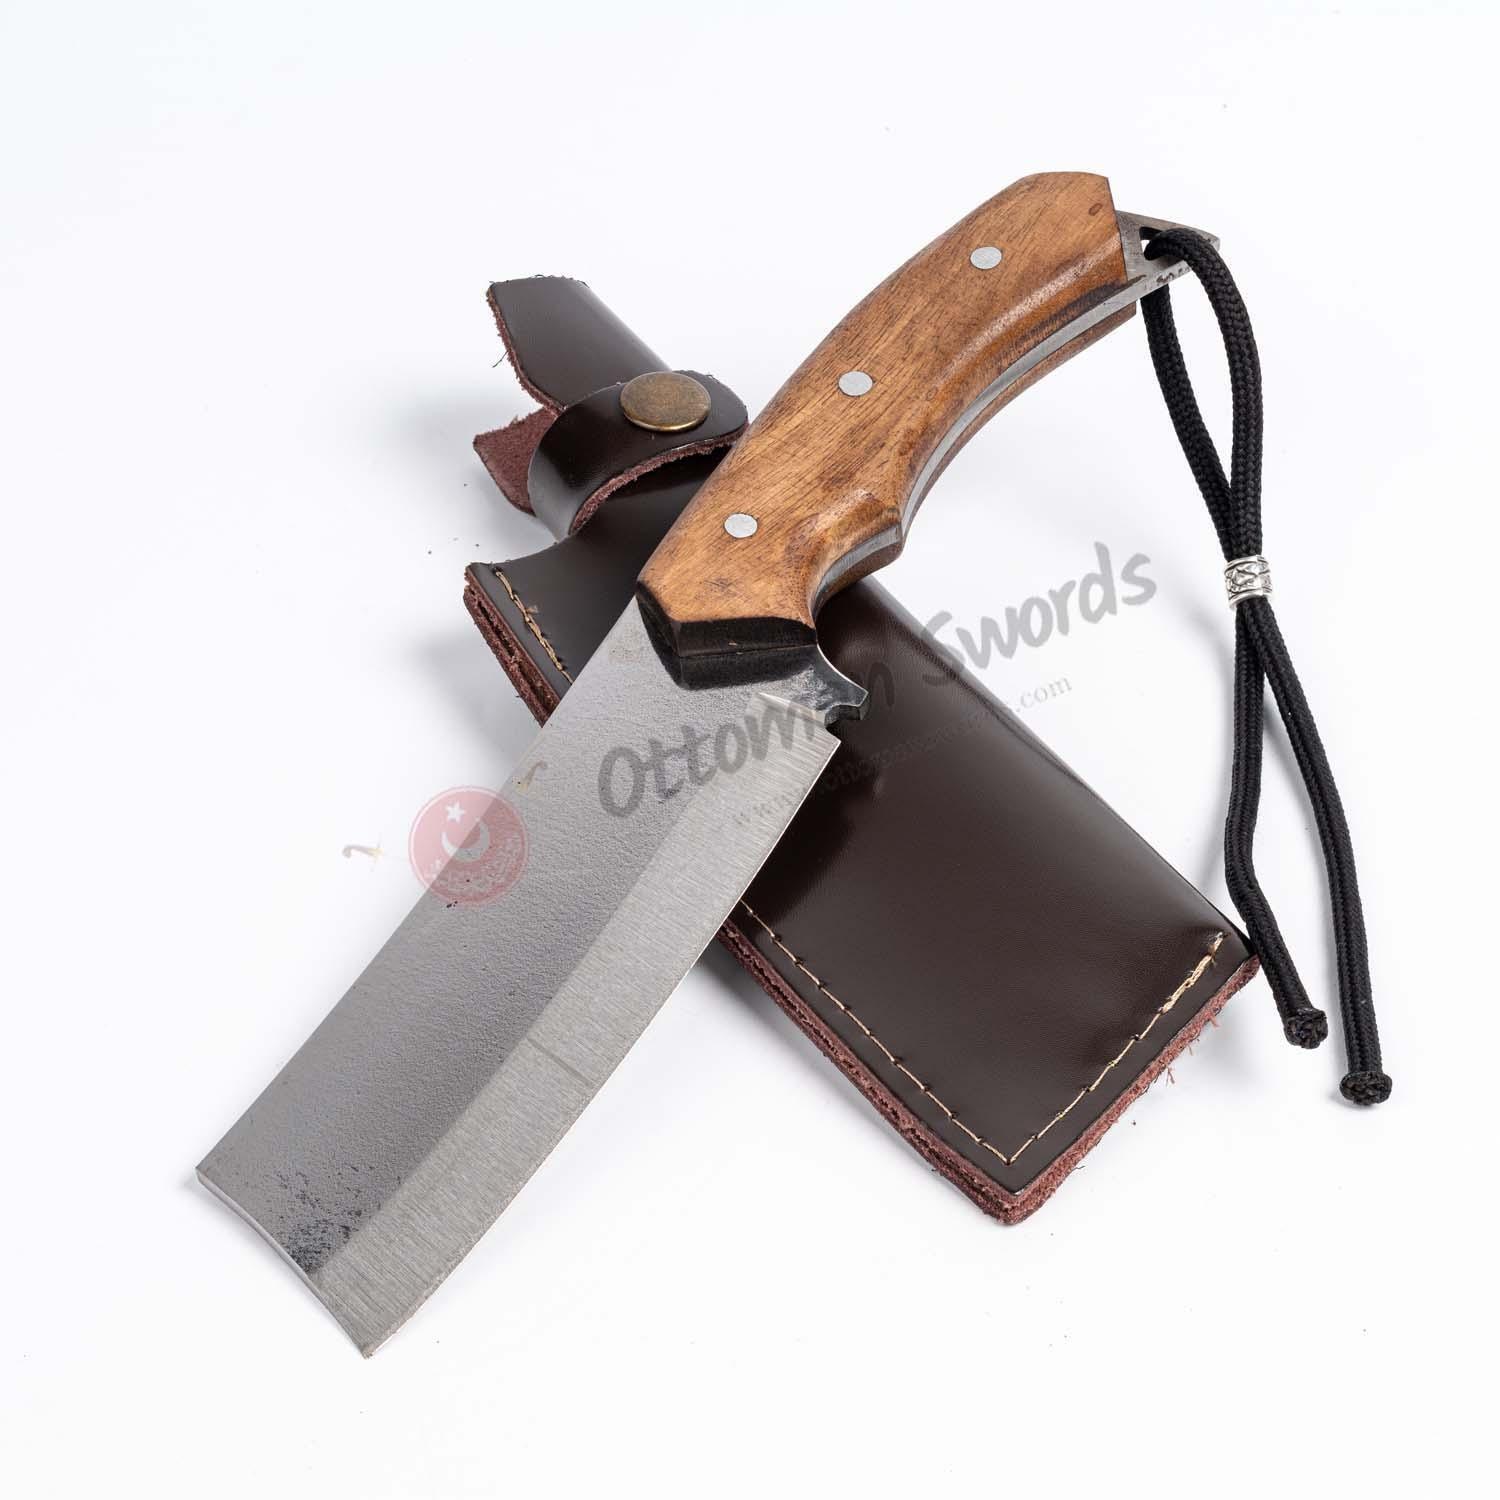 Tanto Camping Knife (1)